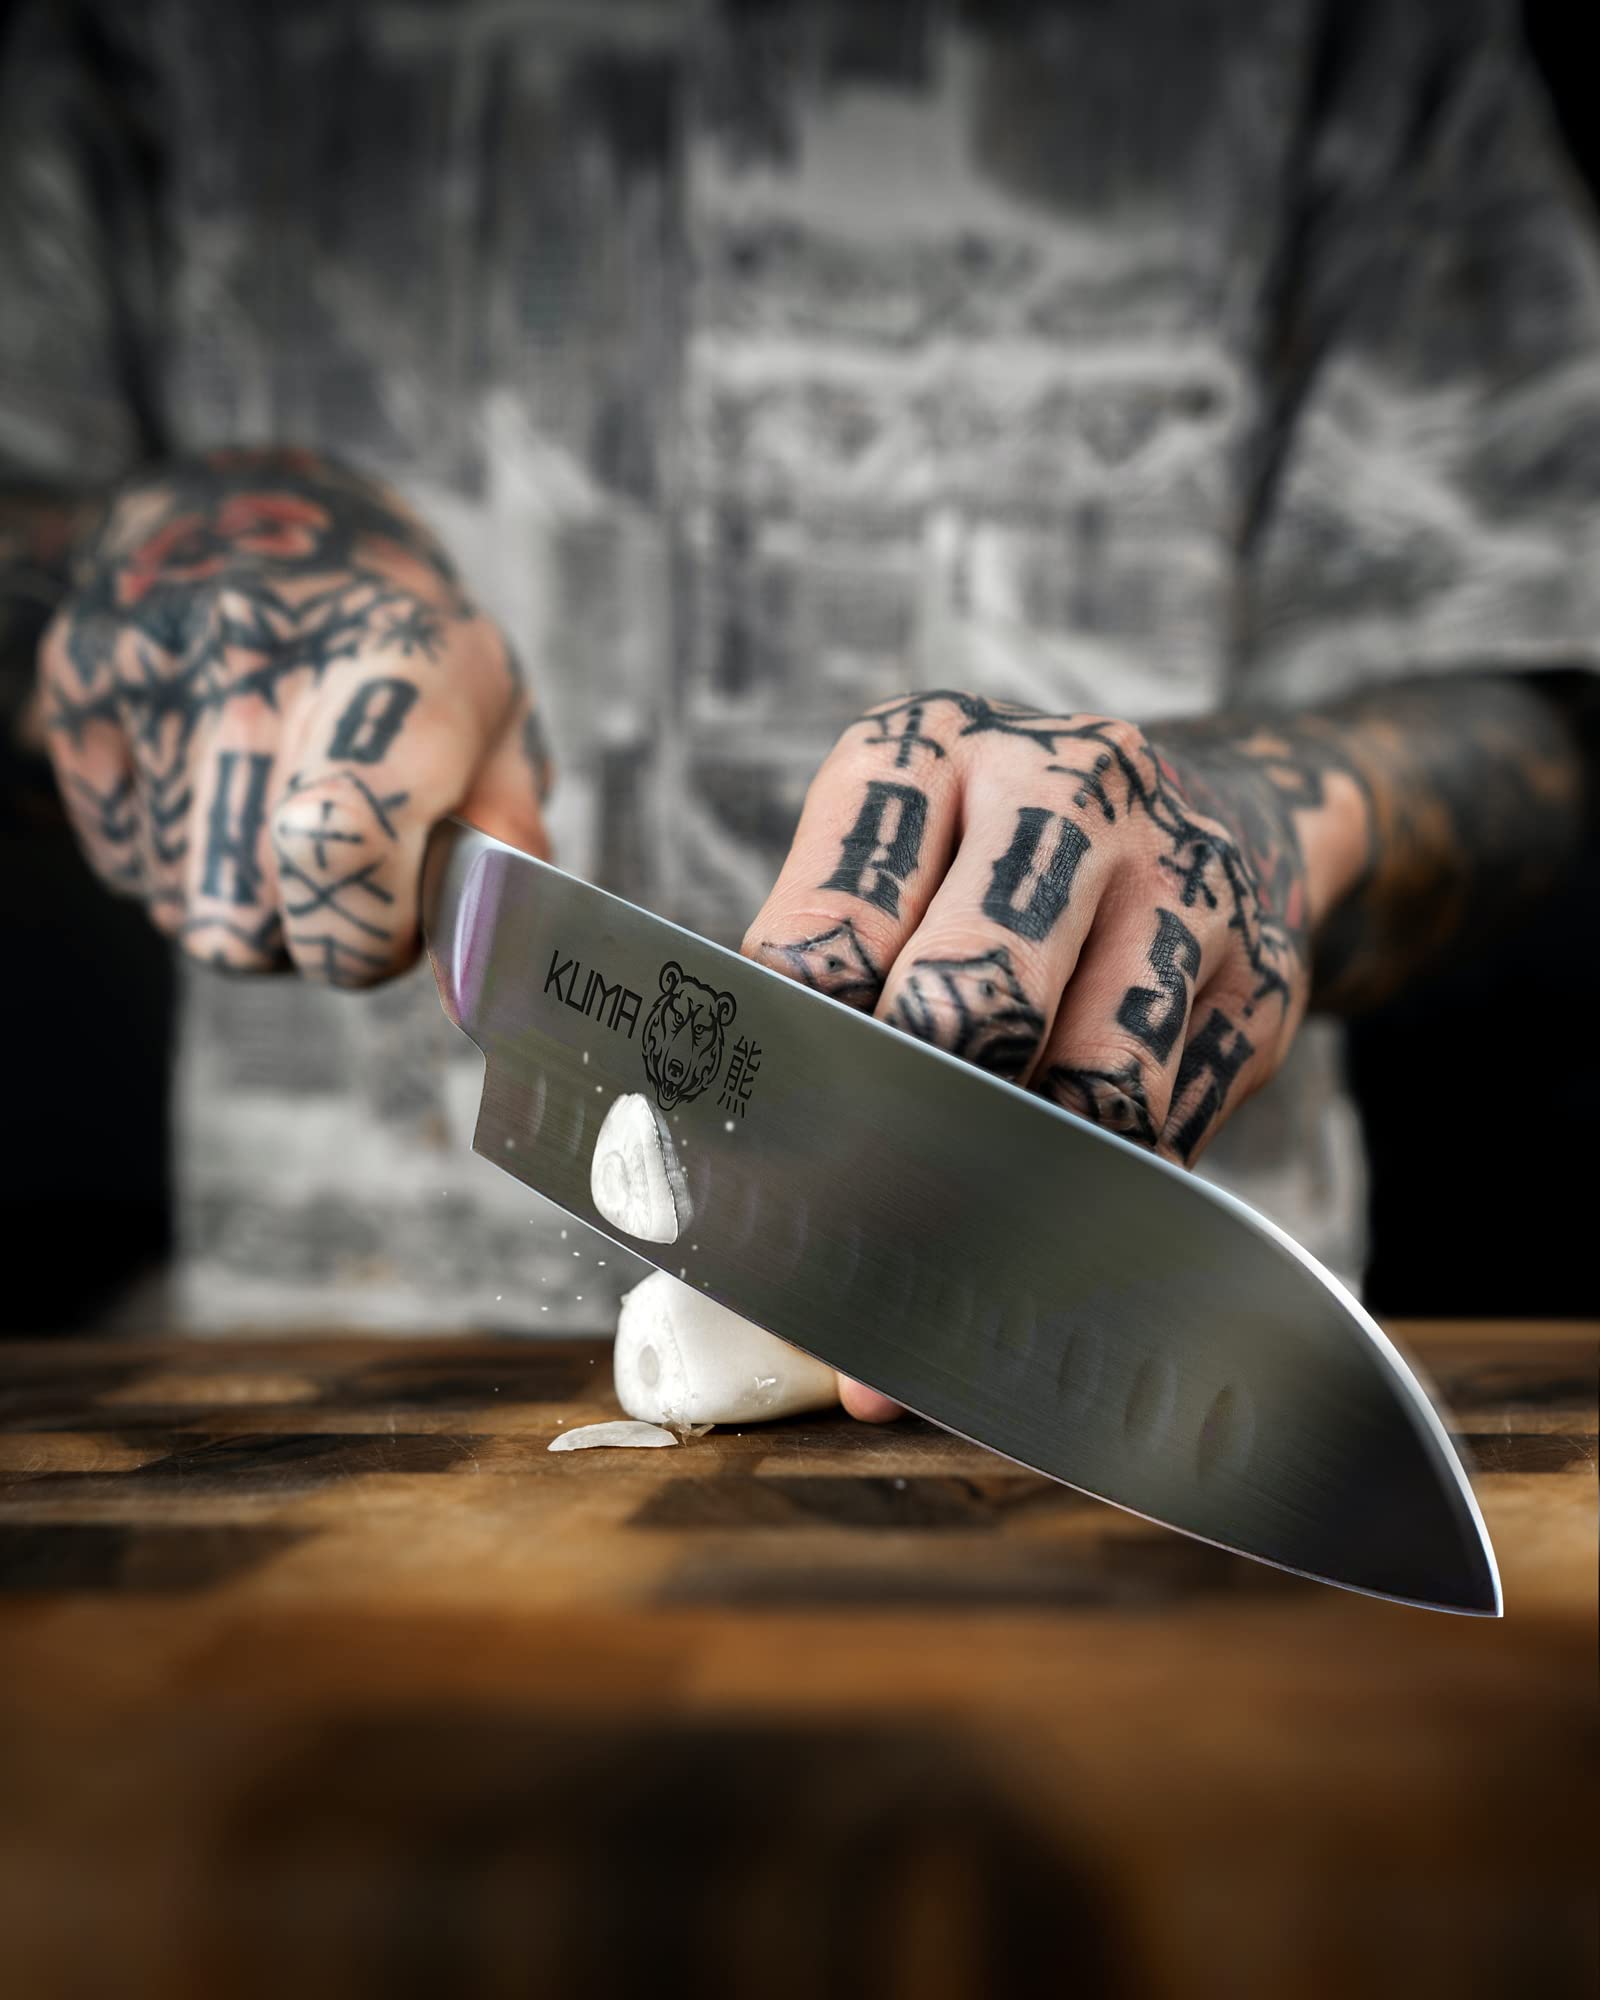 KUMA Santoku 7 Inch - Razor Sharp Kitchen Knife - Japanese Style Multipurpose Chef's Knife with Comfortable Handle & No-Fatigue Design - Cut Meat, Fish, Vegetables and More Like a Professional